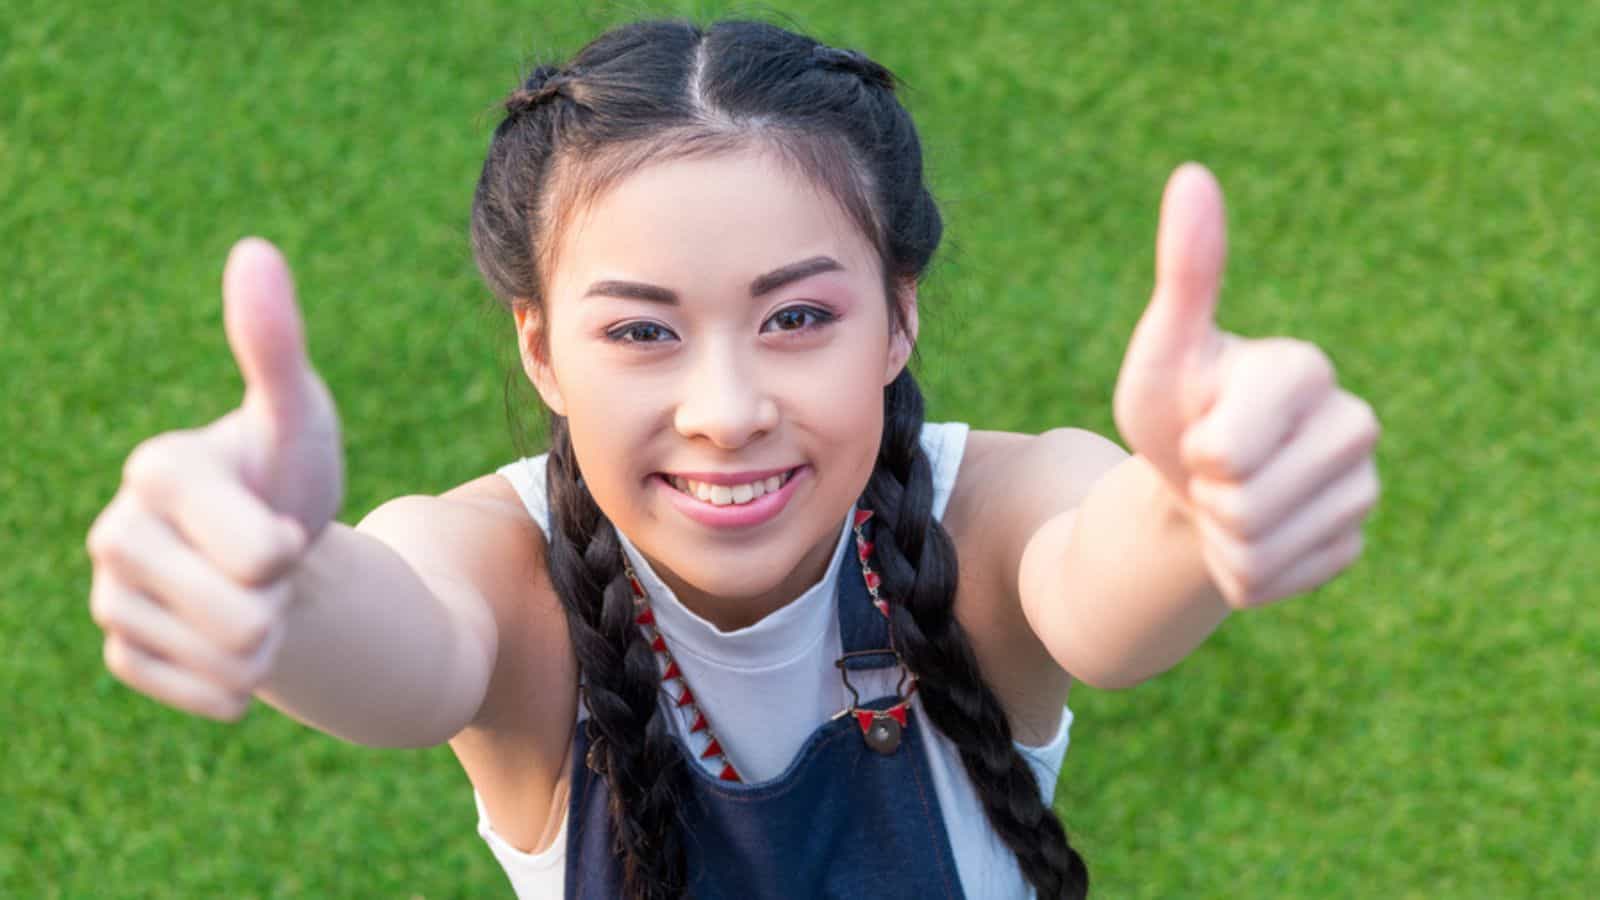 New Asian girl showing thumbs up